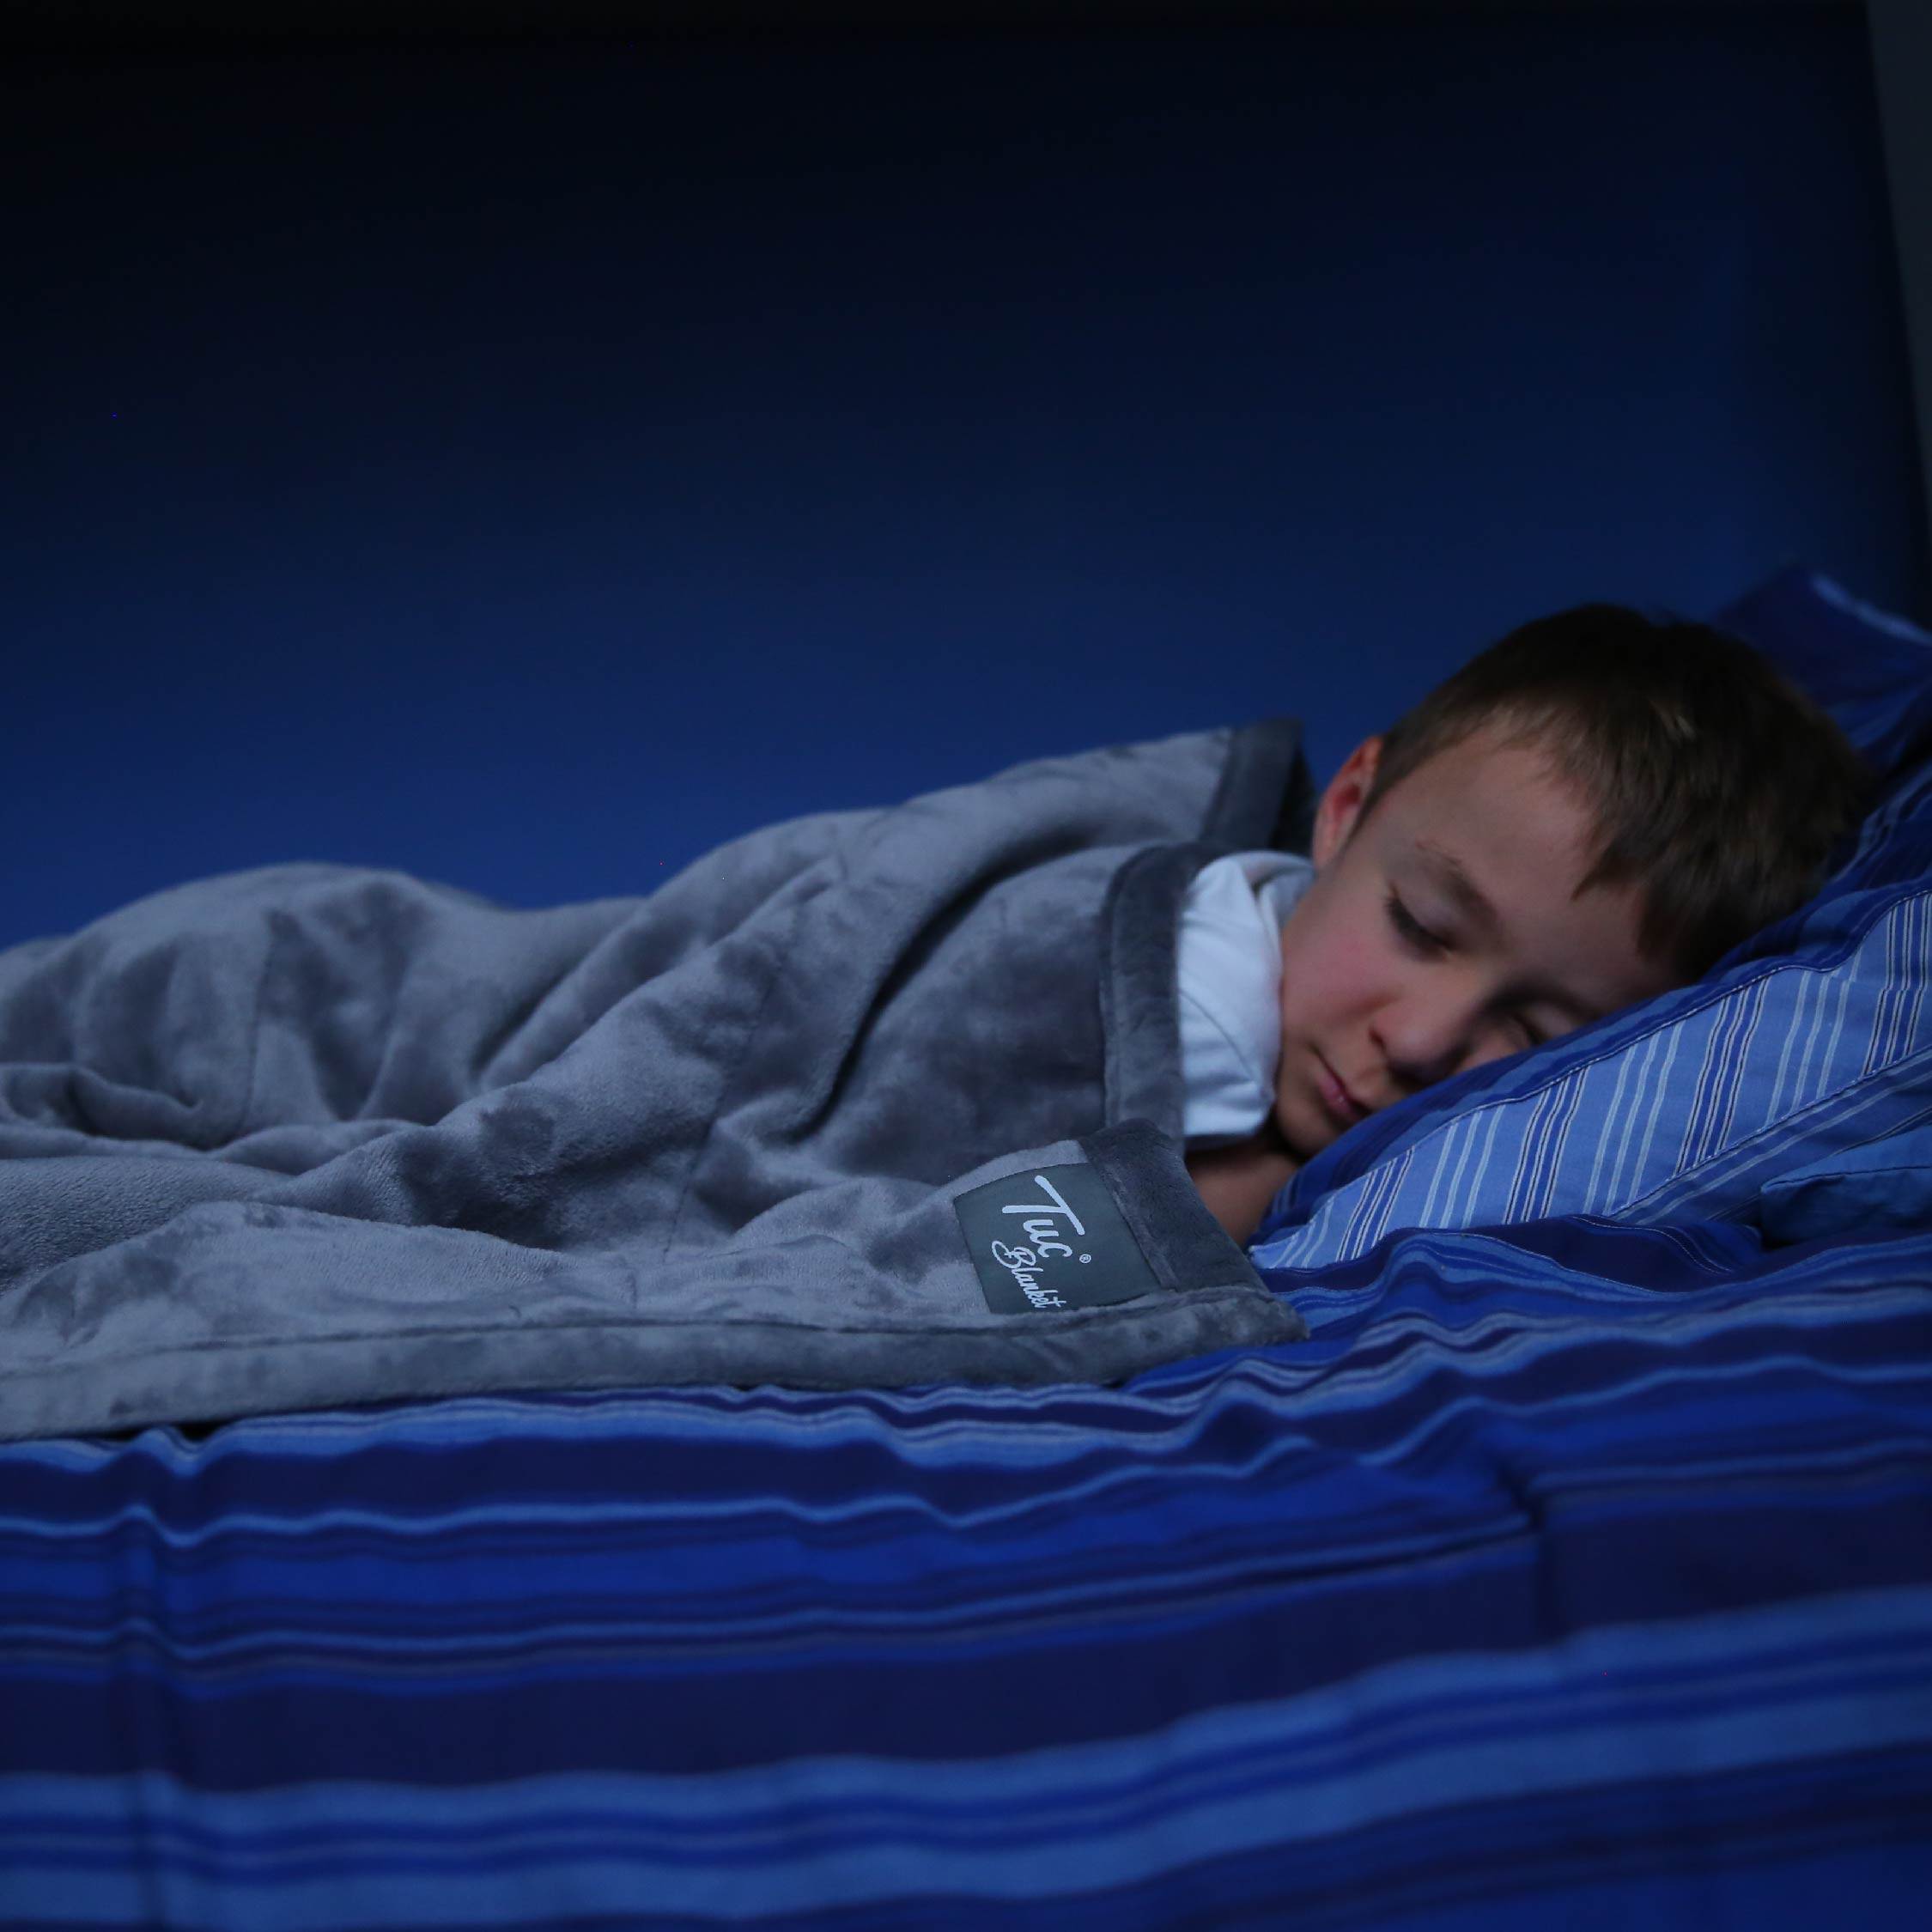 Boy sleeping peacefully with the Tuc Kids Warm Weighted Blanket.